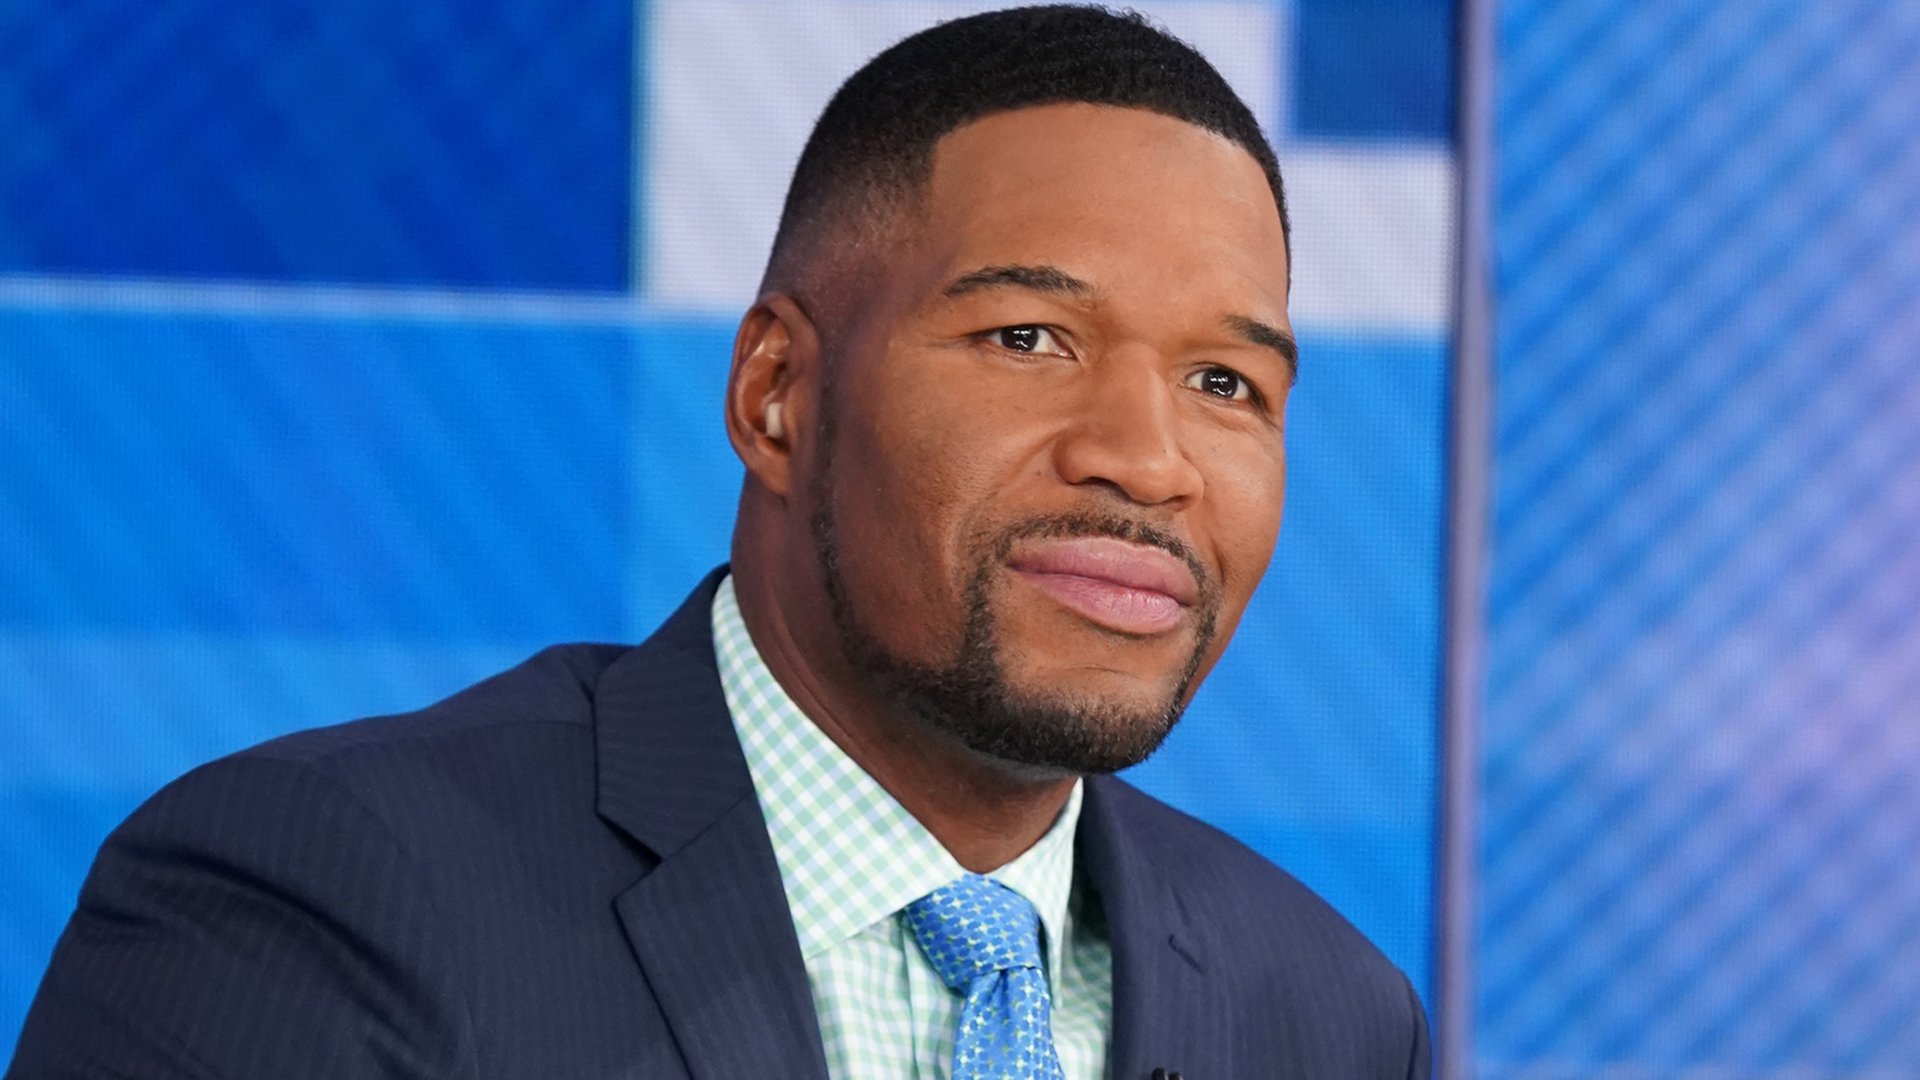 GMA host Michael Strahan receives major recognition & is awarded the title of star distances by himself on morning show